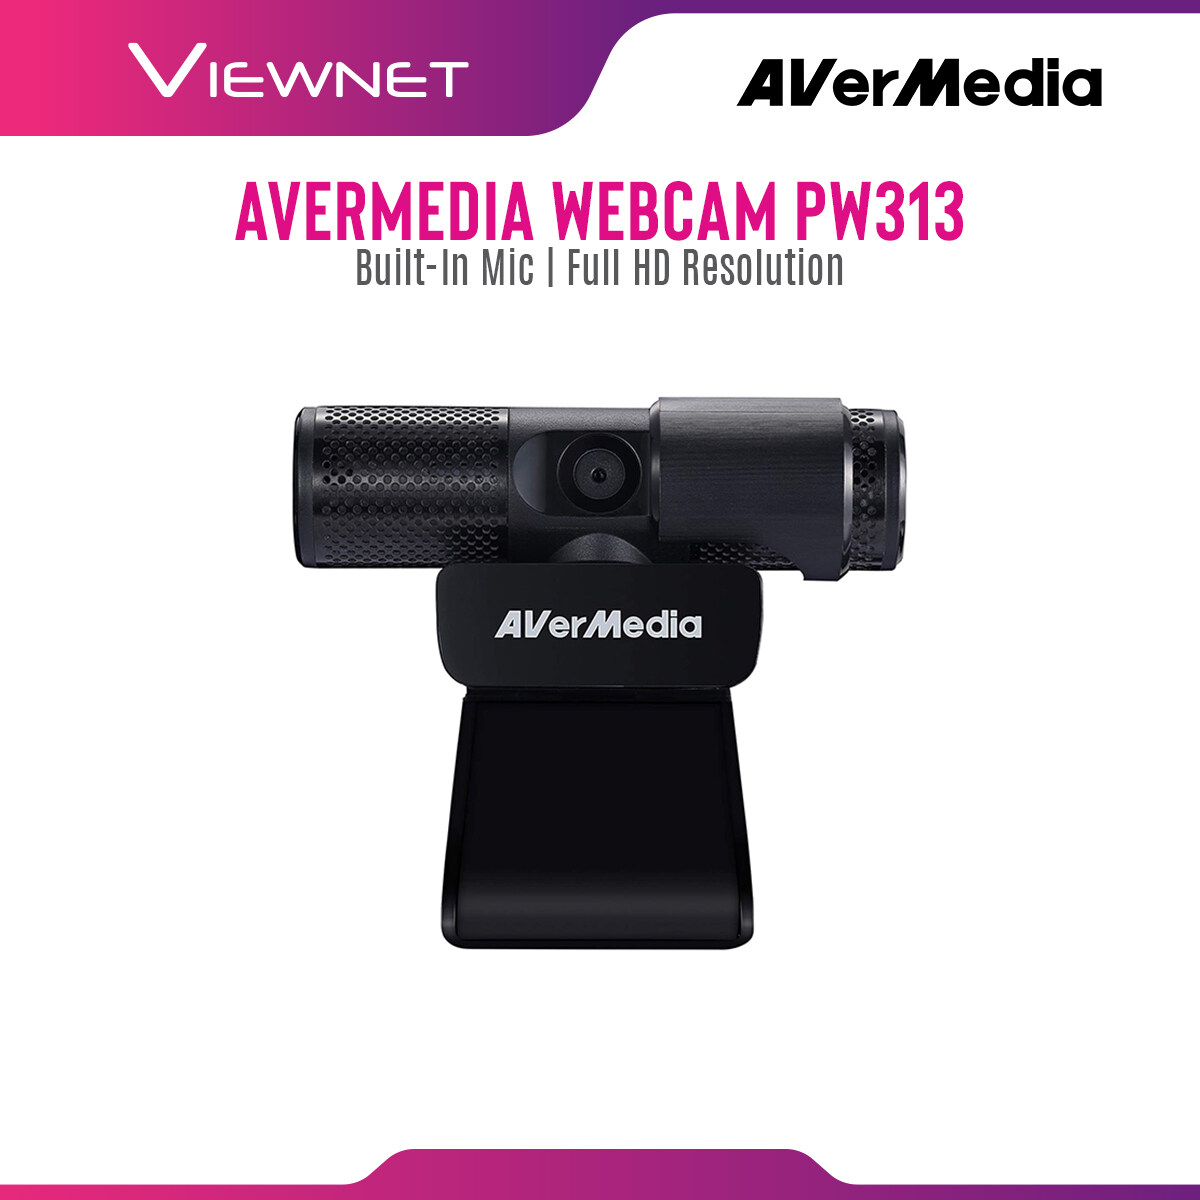 Avermedia Wired Webcam PW313 with USB 2.0 Connection, 1080p Full HD Resolution, Fixed Focus, Built-in Dual Microphone, 1/2.7â€™â€™ CMOS Sensor 2MP